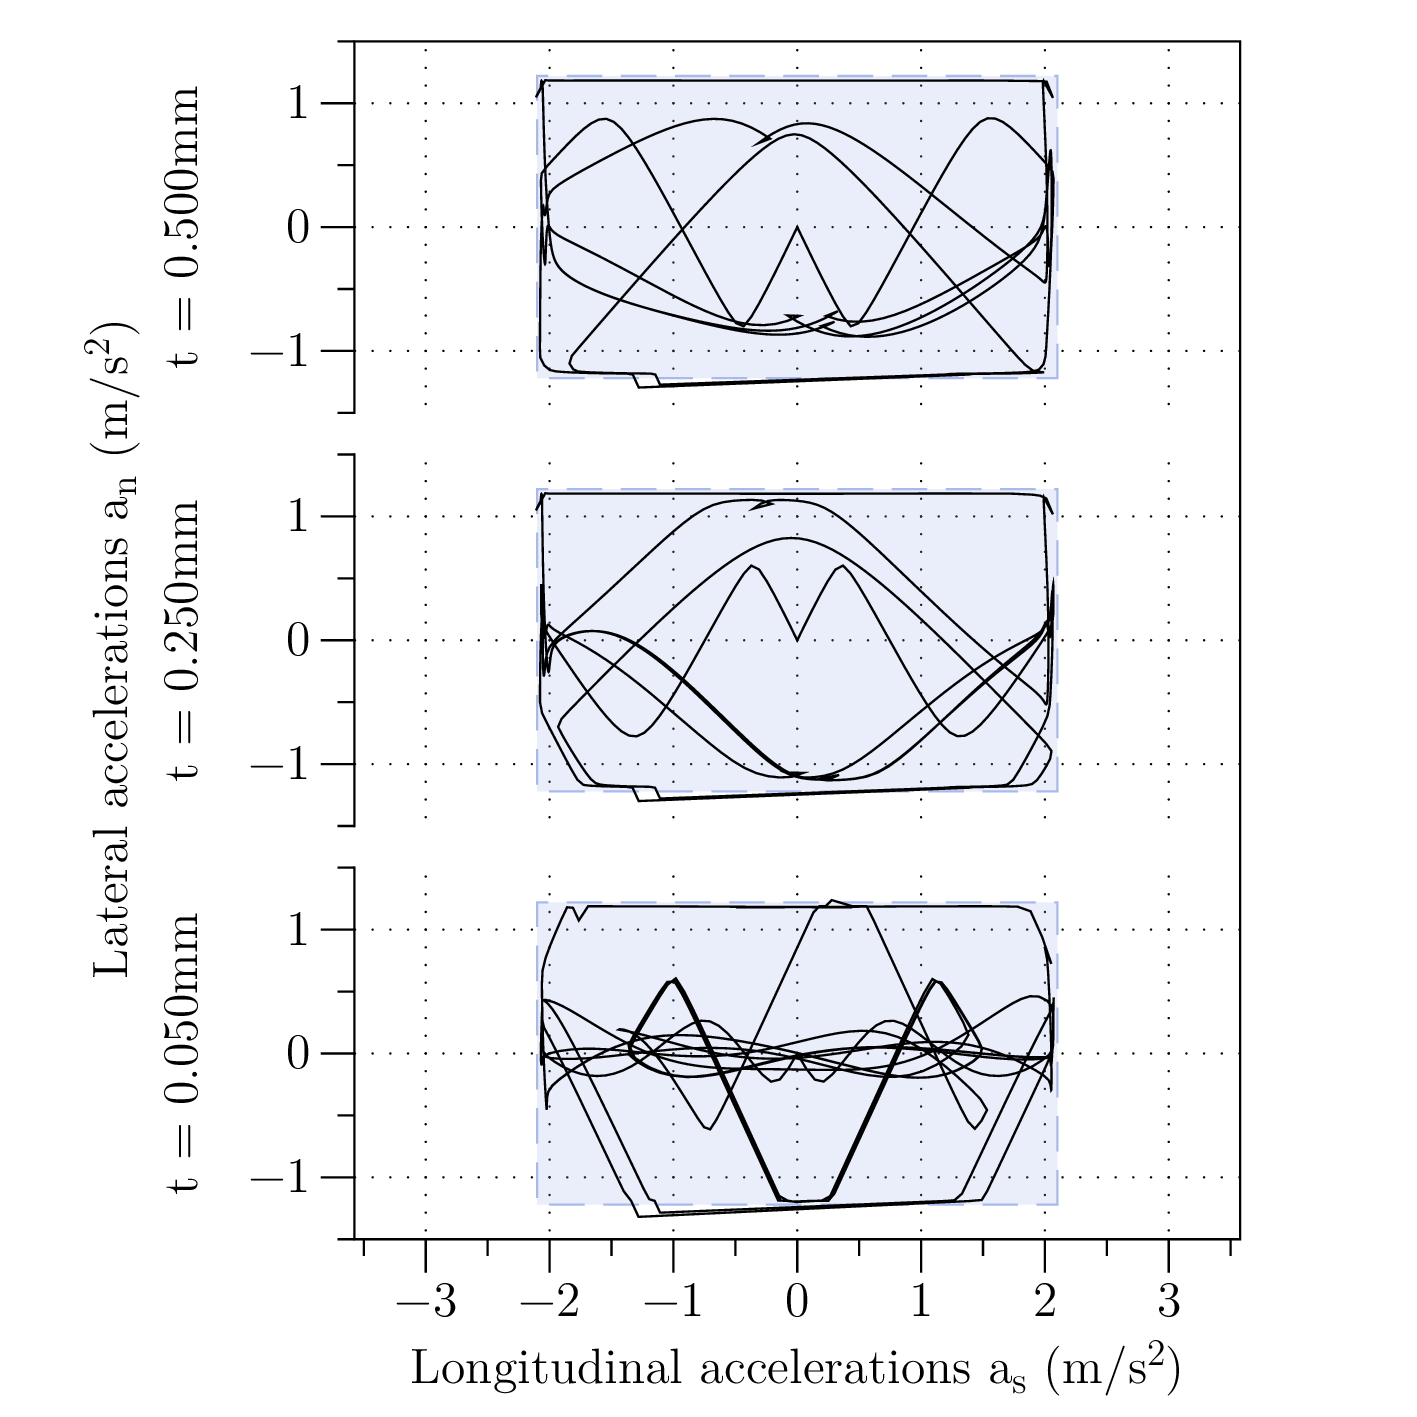 Longitudinal and lateral accelerations,calculated by OCP. Square boxes represent the constraint set in longitudinal and lateral directions.